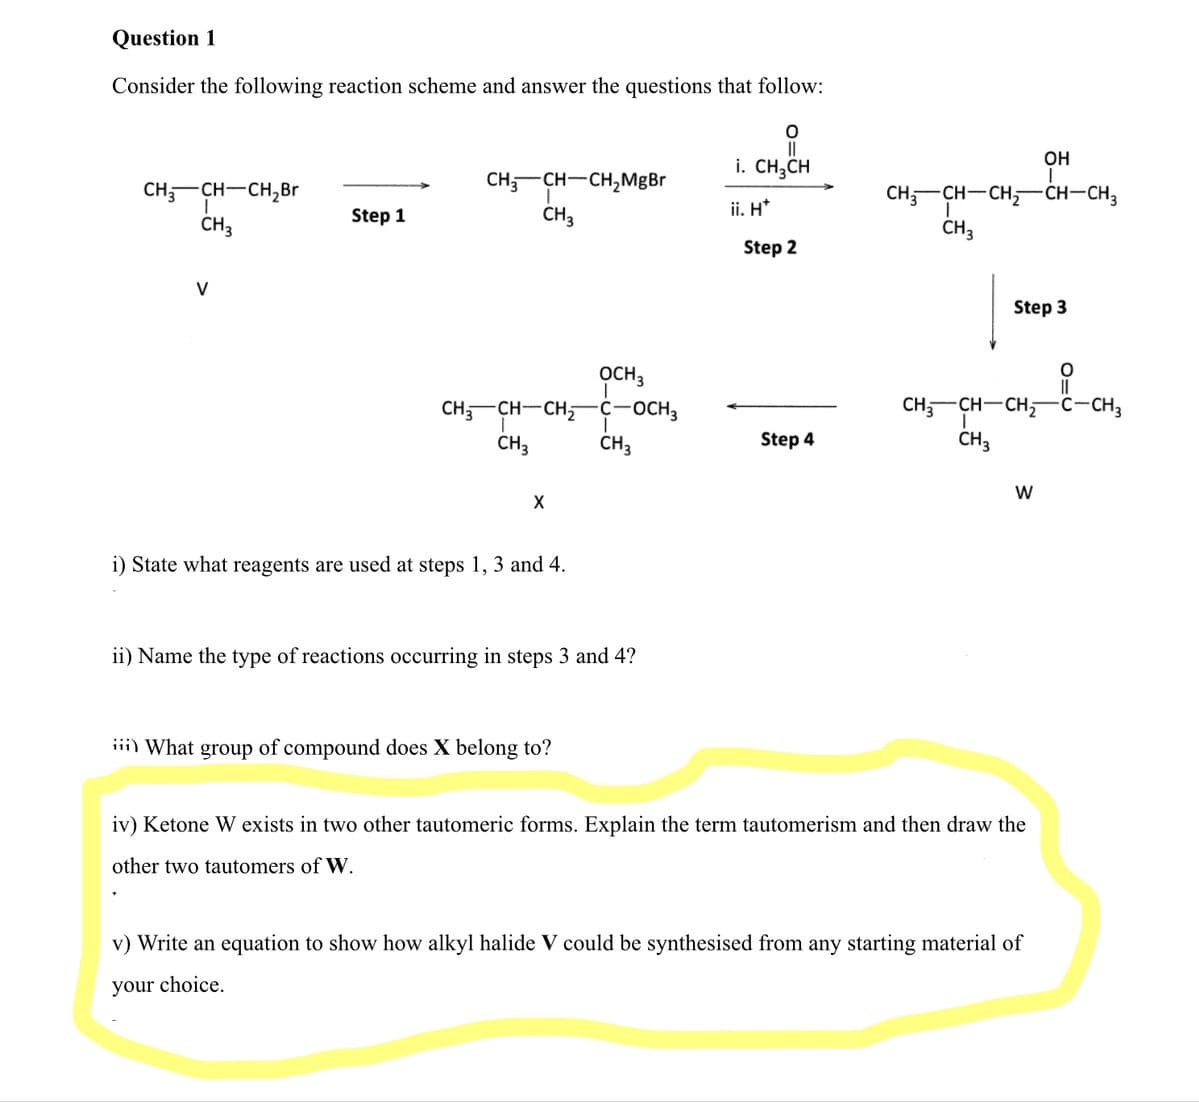 Question 1
Consider the following reaction scheme and answer the questions that follow:
OH
i. CH;CH
CH;-CH-CH,MgBr
CH,-CH-CH,Br
CH,-CH-CH,
CH-CH3
Step 1
CH3
ii. H*
CH3
CH3
Step 2
V
Step 3
OCH3
CH,-CH-CH
C-OCH3
CH-CH-CH,
C-CH3
CH3
CH3
Step 4
CH3
i) State what reagents are used at steps 1, 3 and 4.
ii) Name the type of reactions occurring in steps 3 and 4?
iii) What group of compound does X belong to?
iv) Ketone W exists in two other tautomeric forms. Explain the term tautomerism and then draw the
other two tautomers of W.
v) Write an equation to show how alkyl halide V could be synthesised from any starting material of
your choice.
O=U
